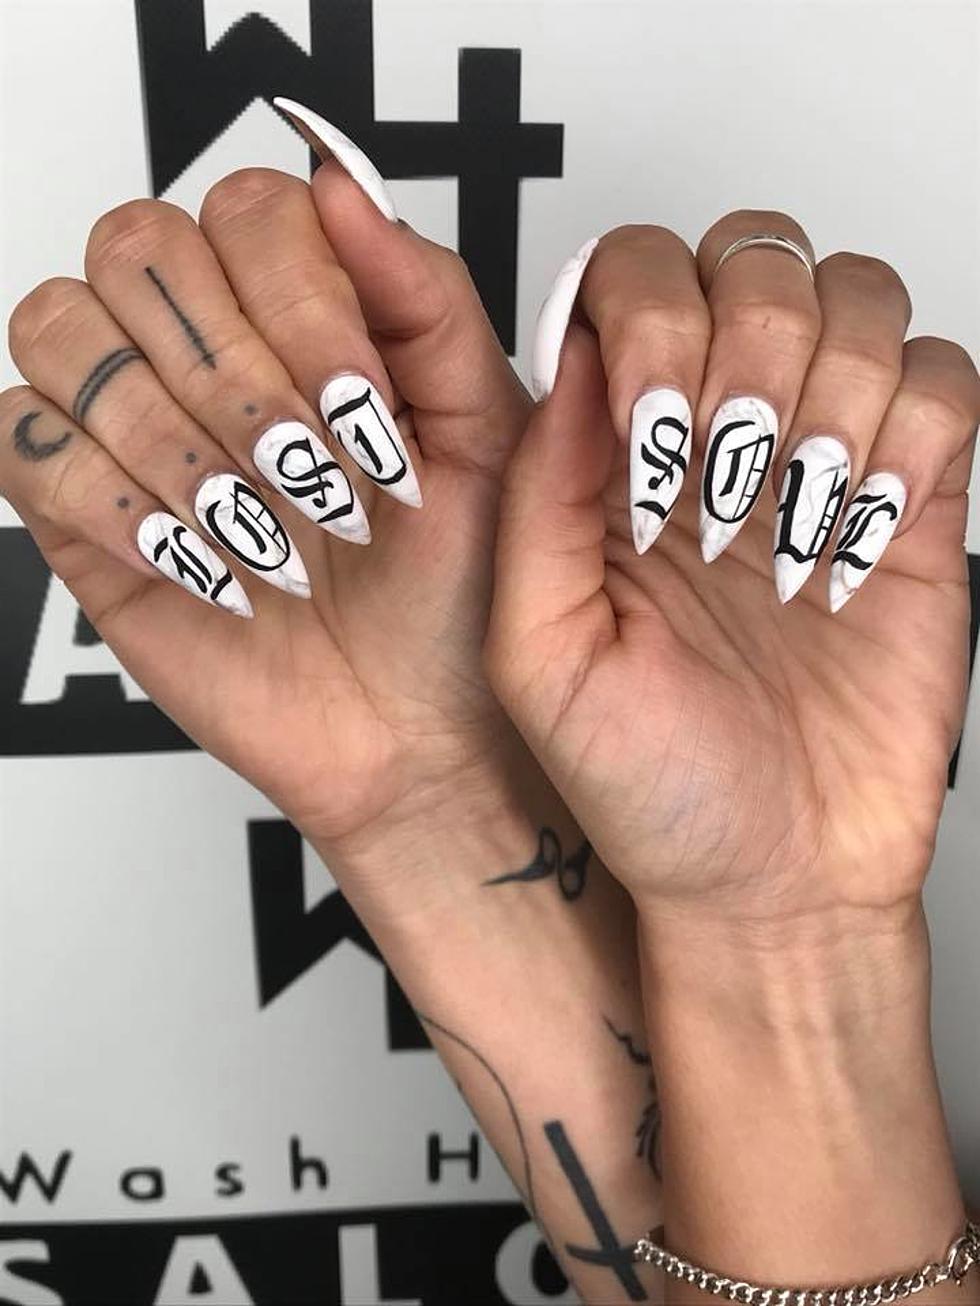 How Do You Feel About These Scary Nails? [POLL]